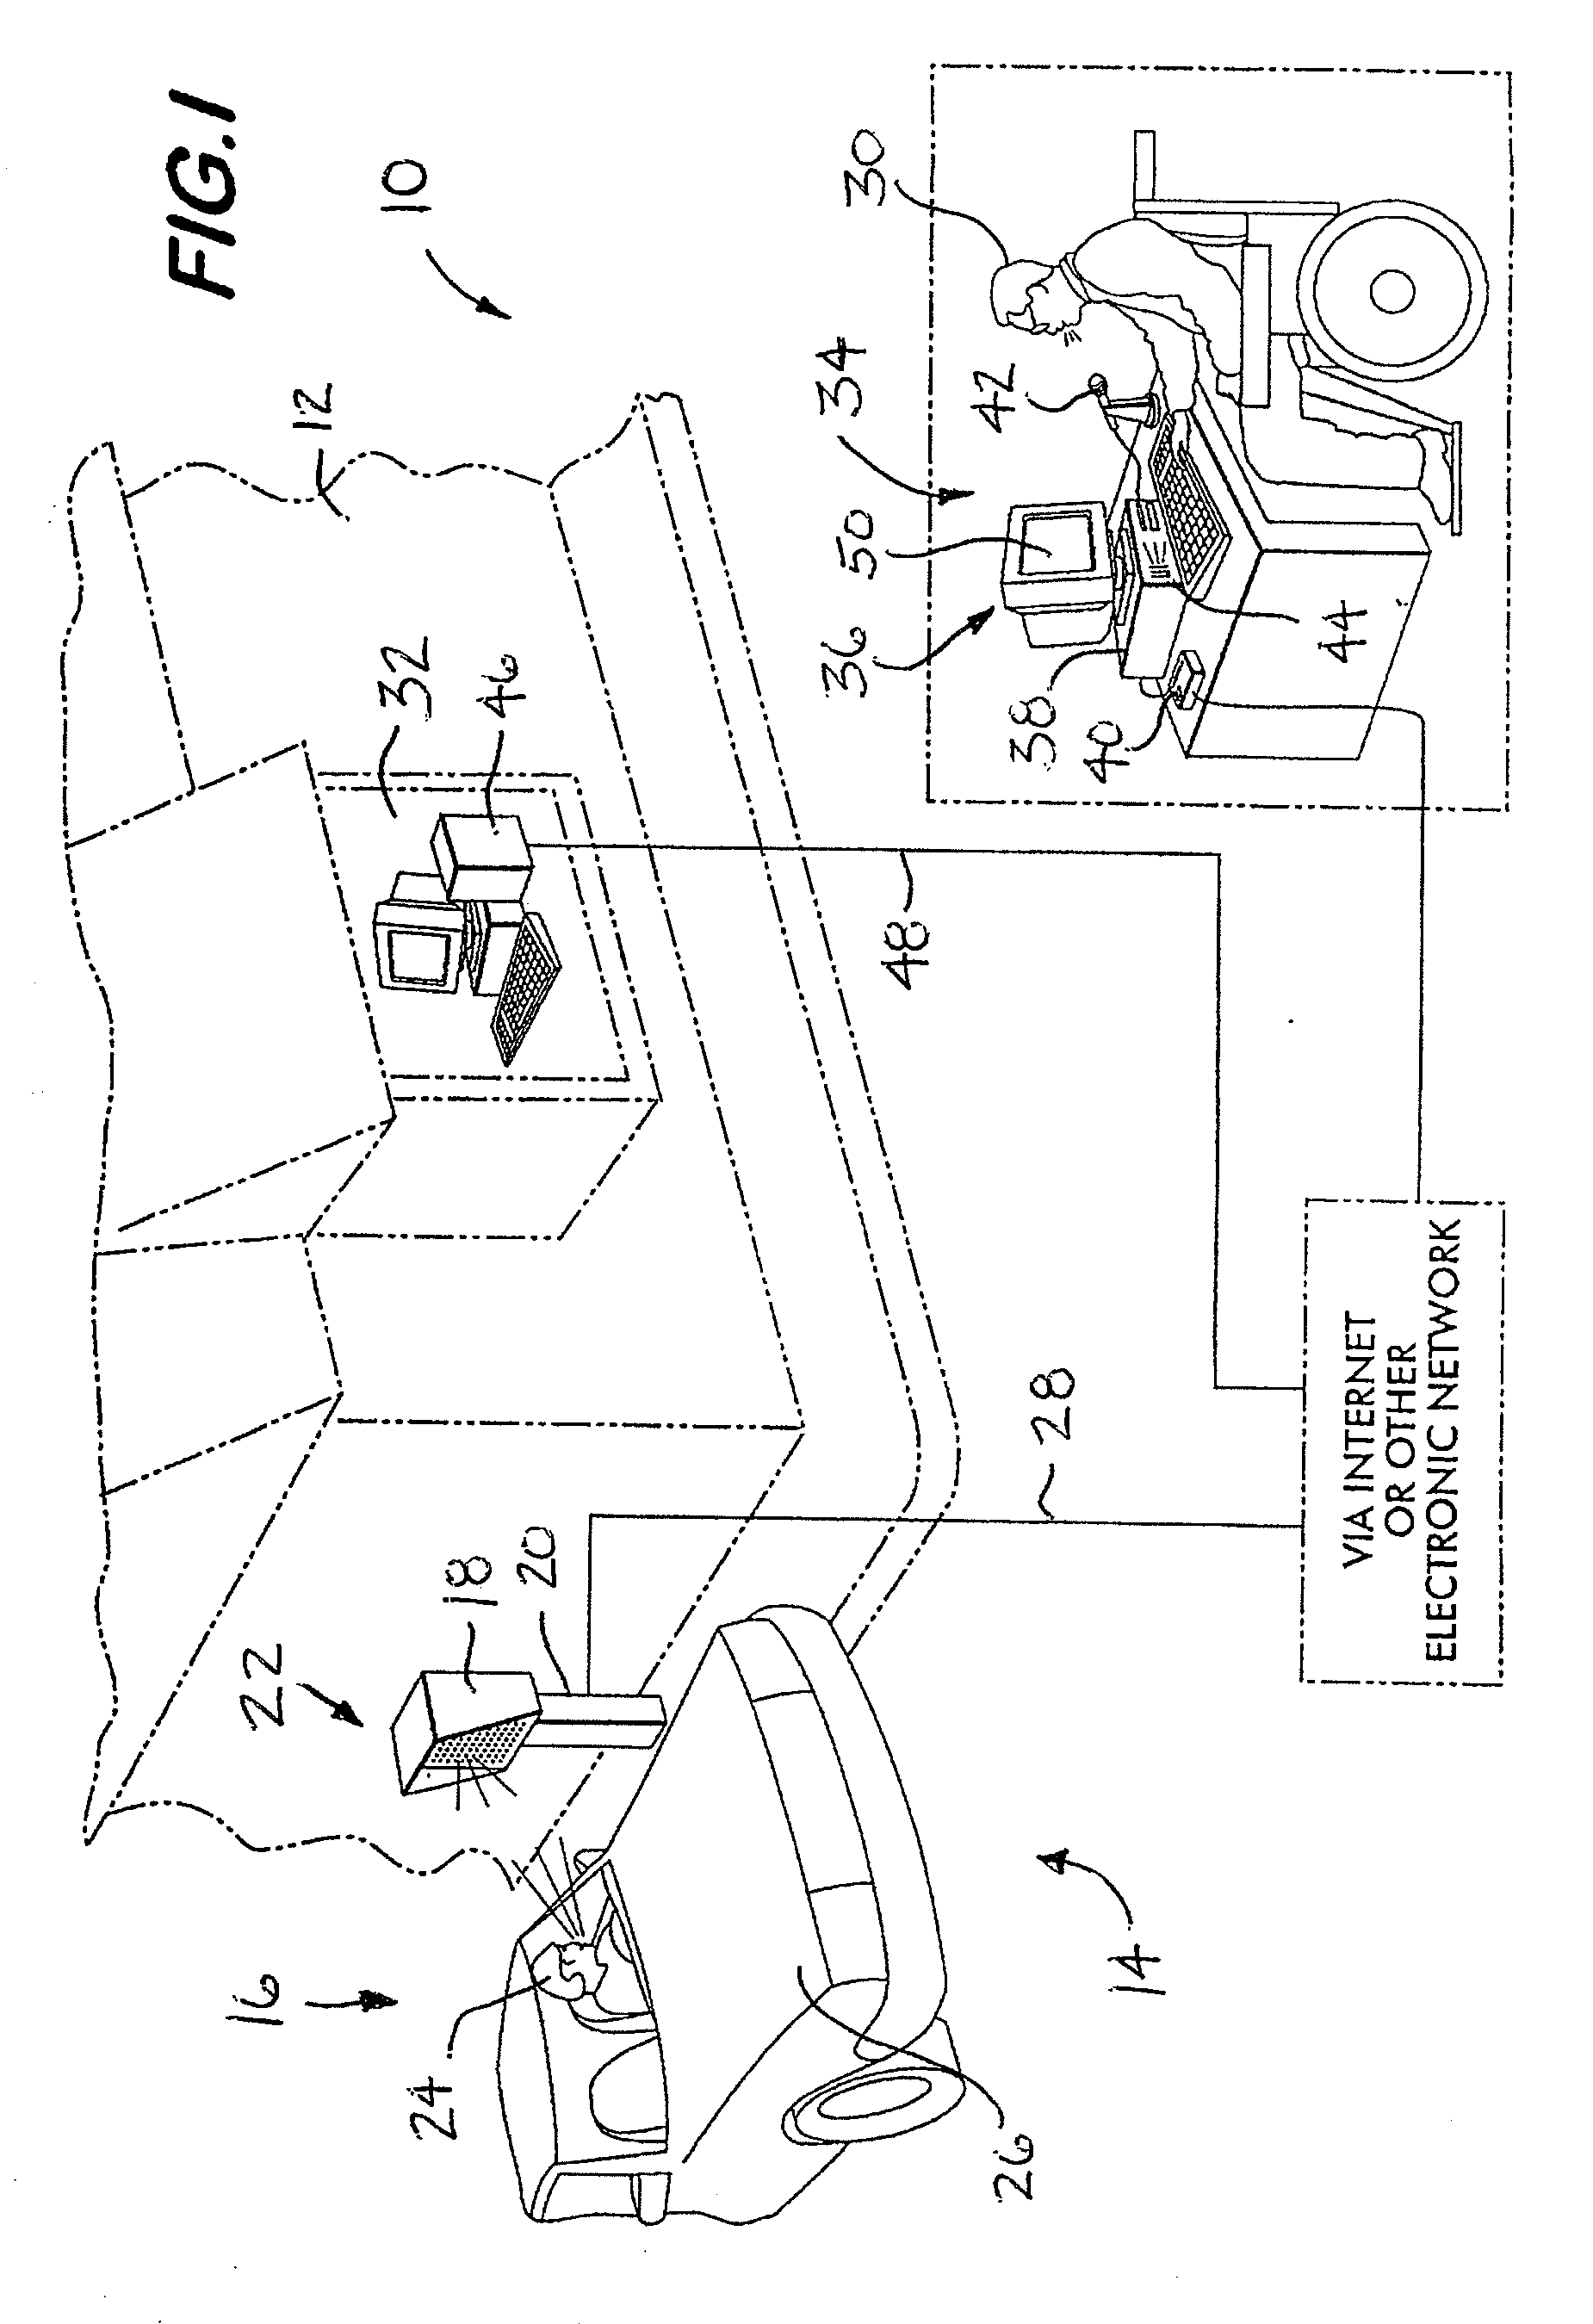 Method and system for entering orders of customers